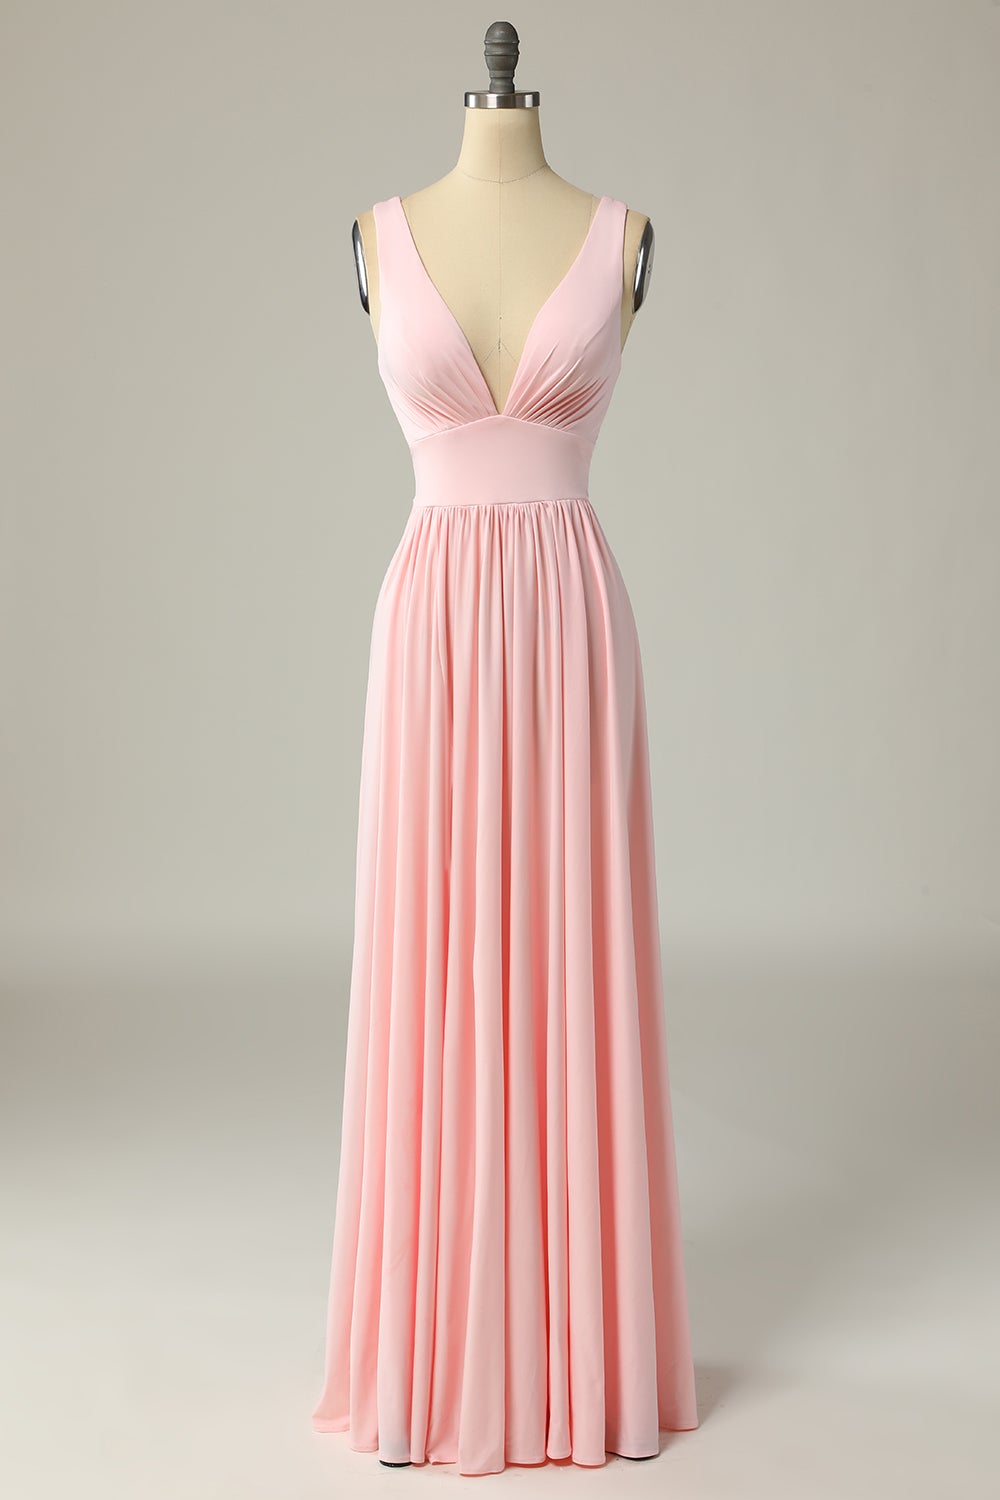 Classic Pink Long Prom Dress with Split Front